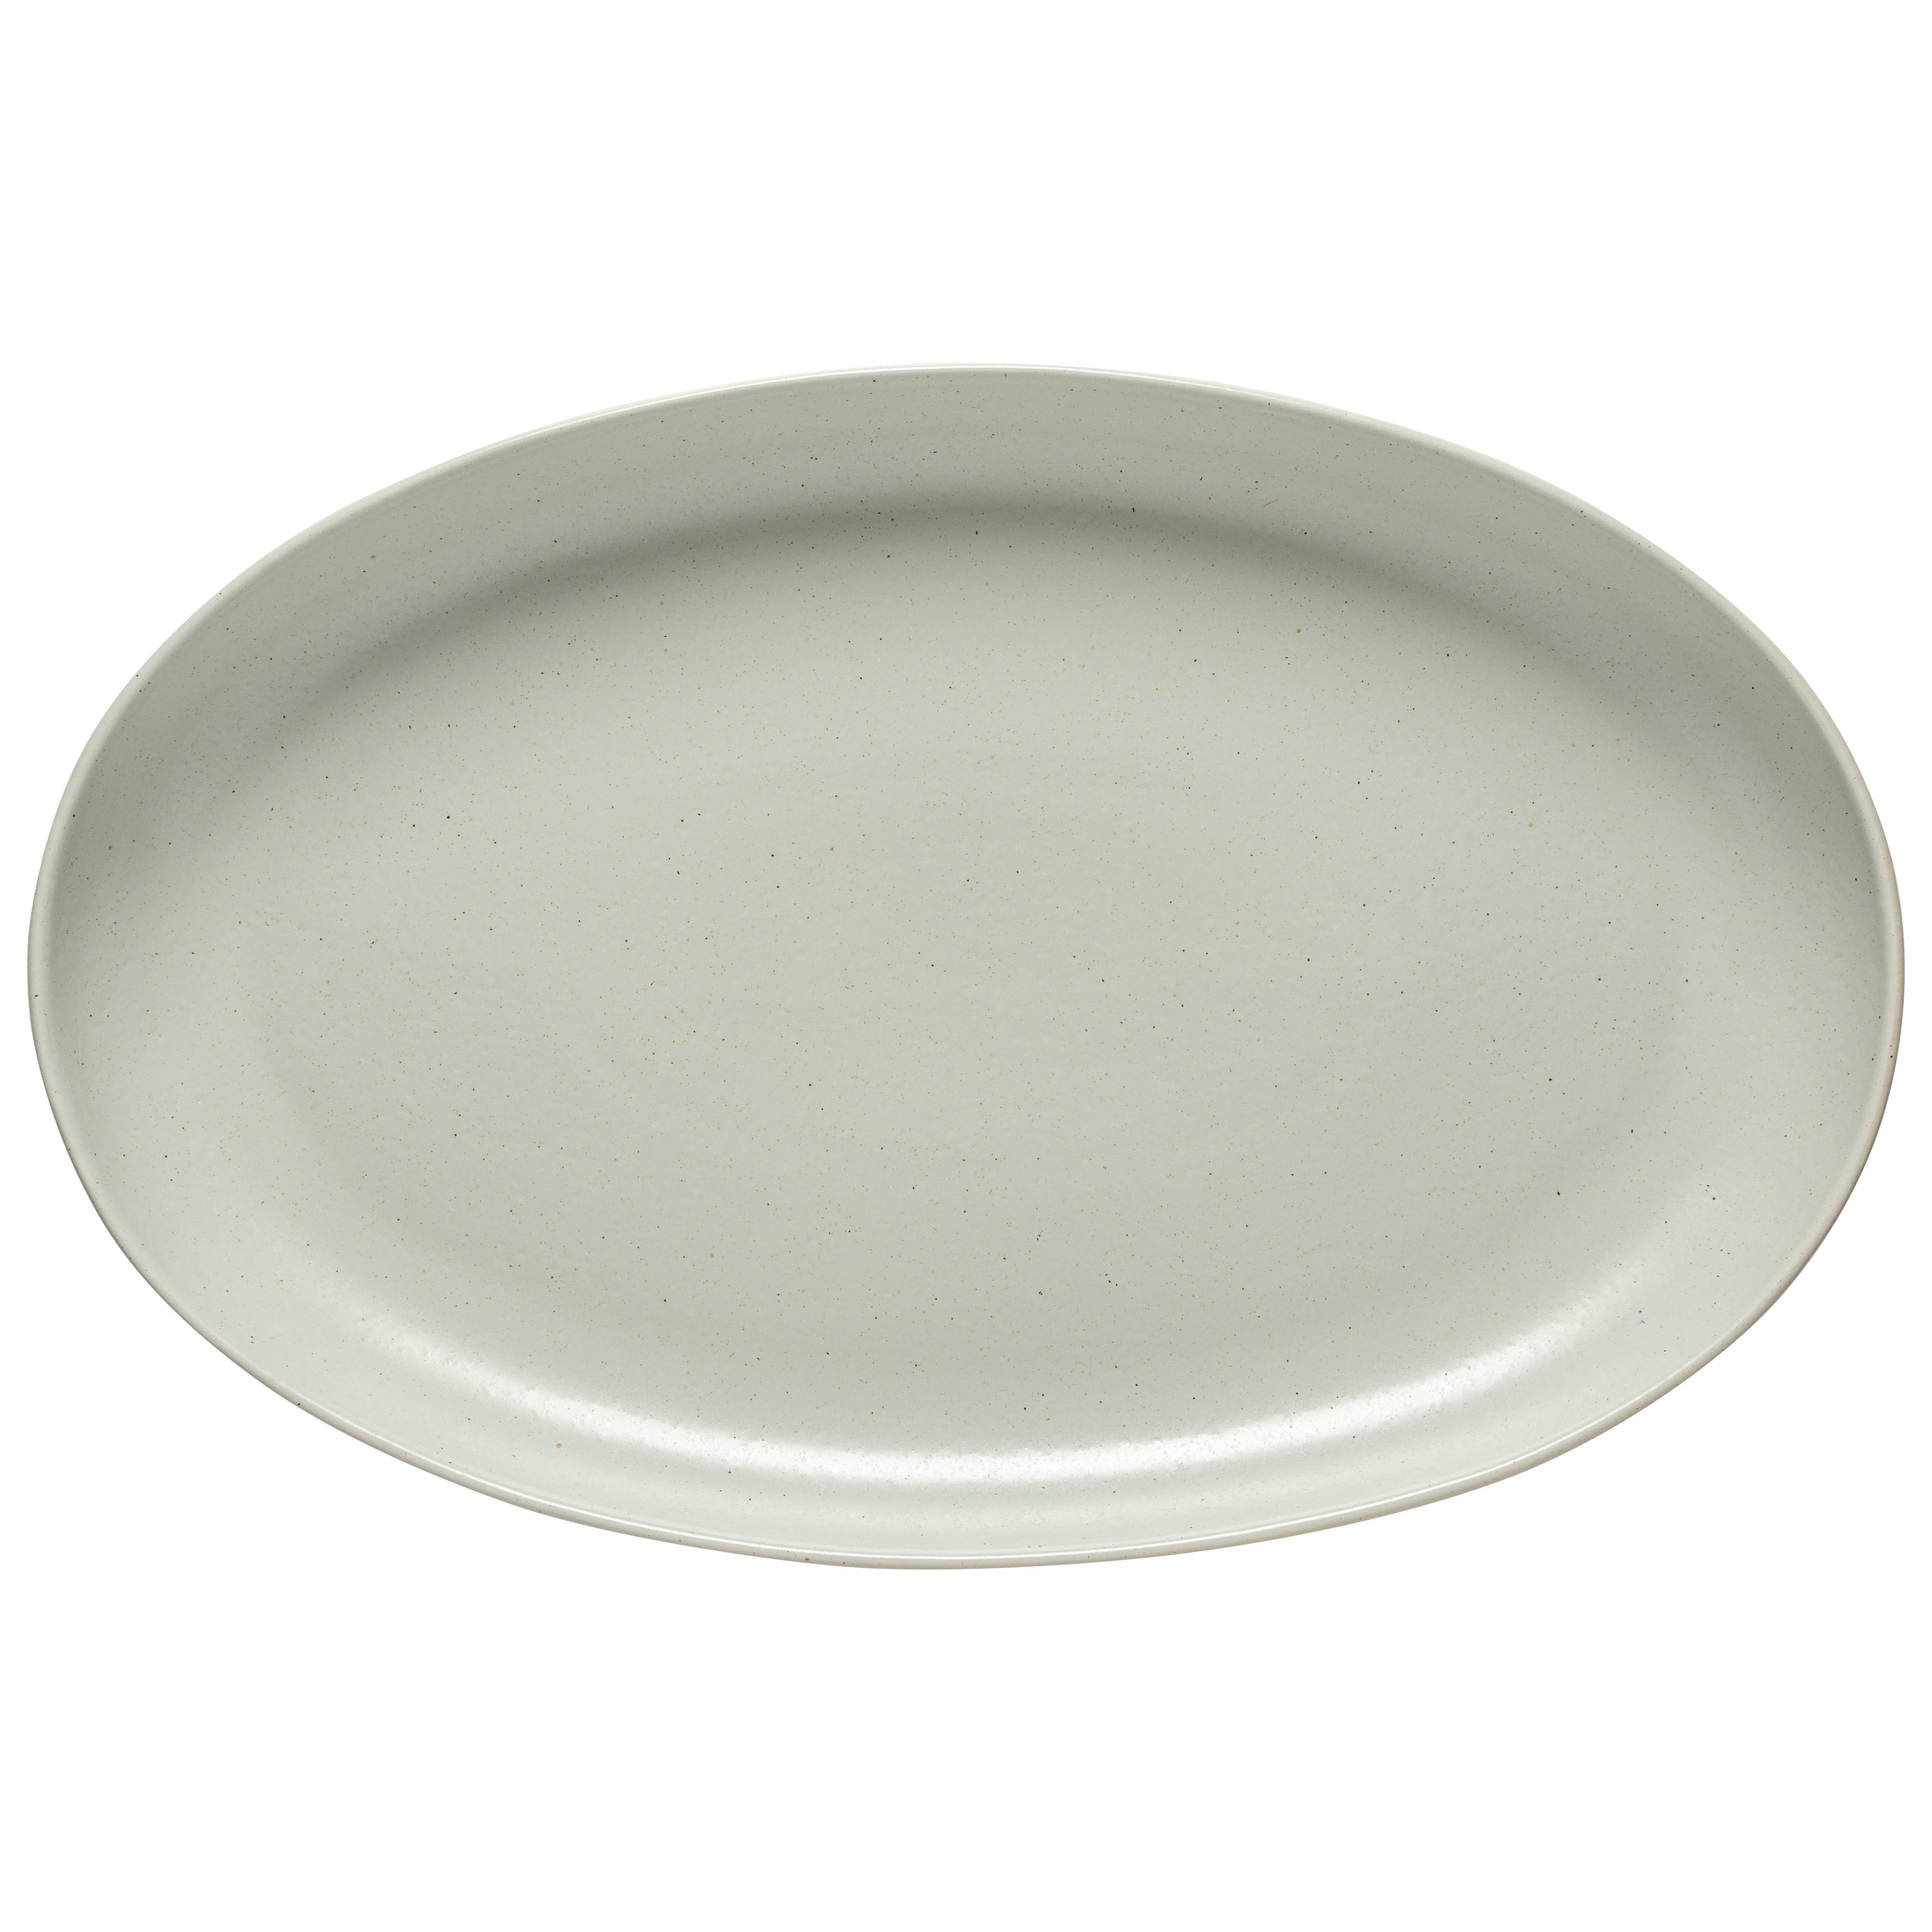 Pacifica Oyster Grey Oval Platter 41cm Gift